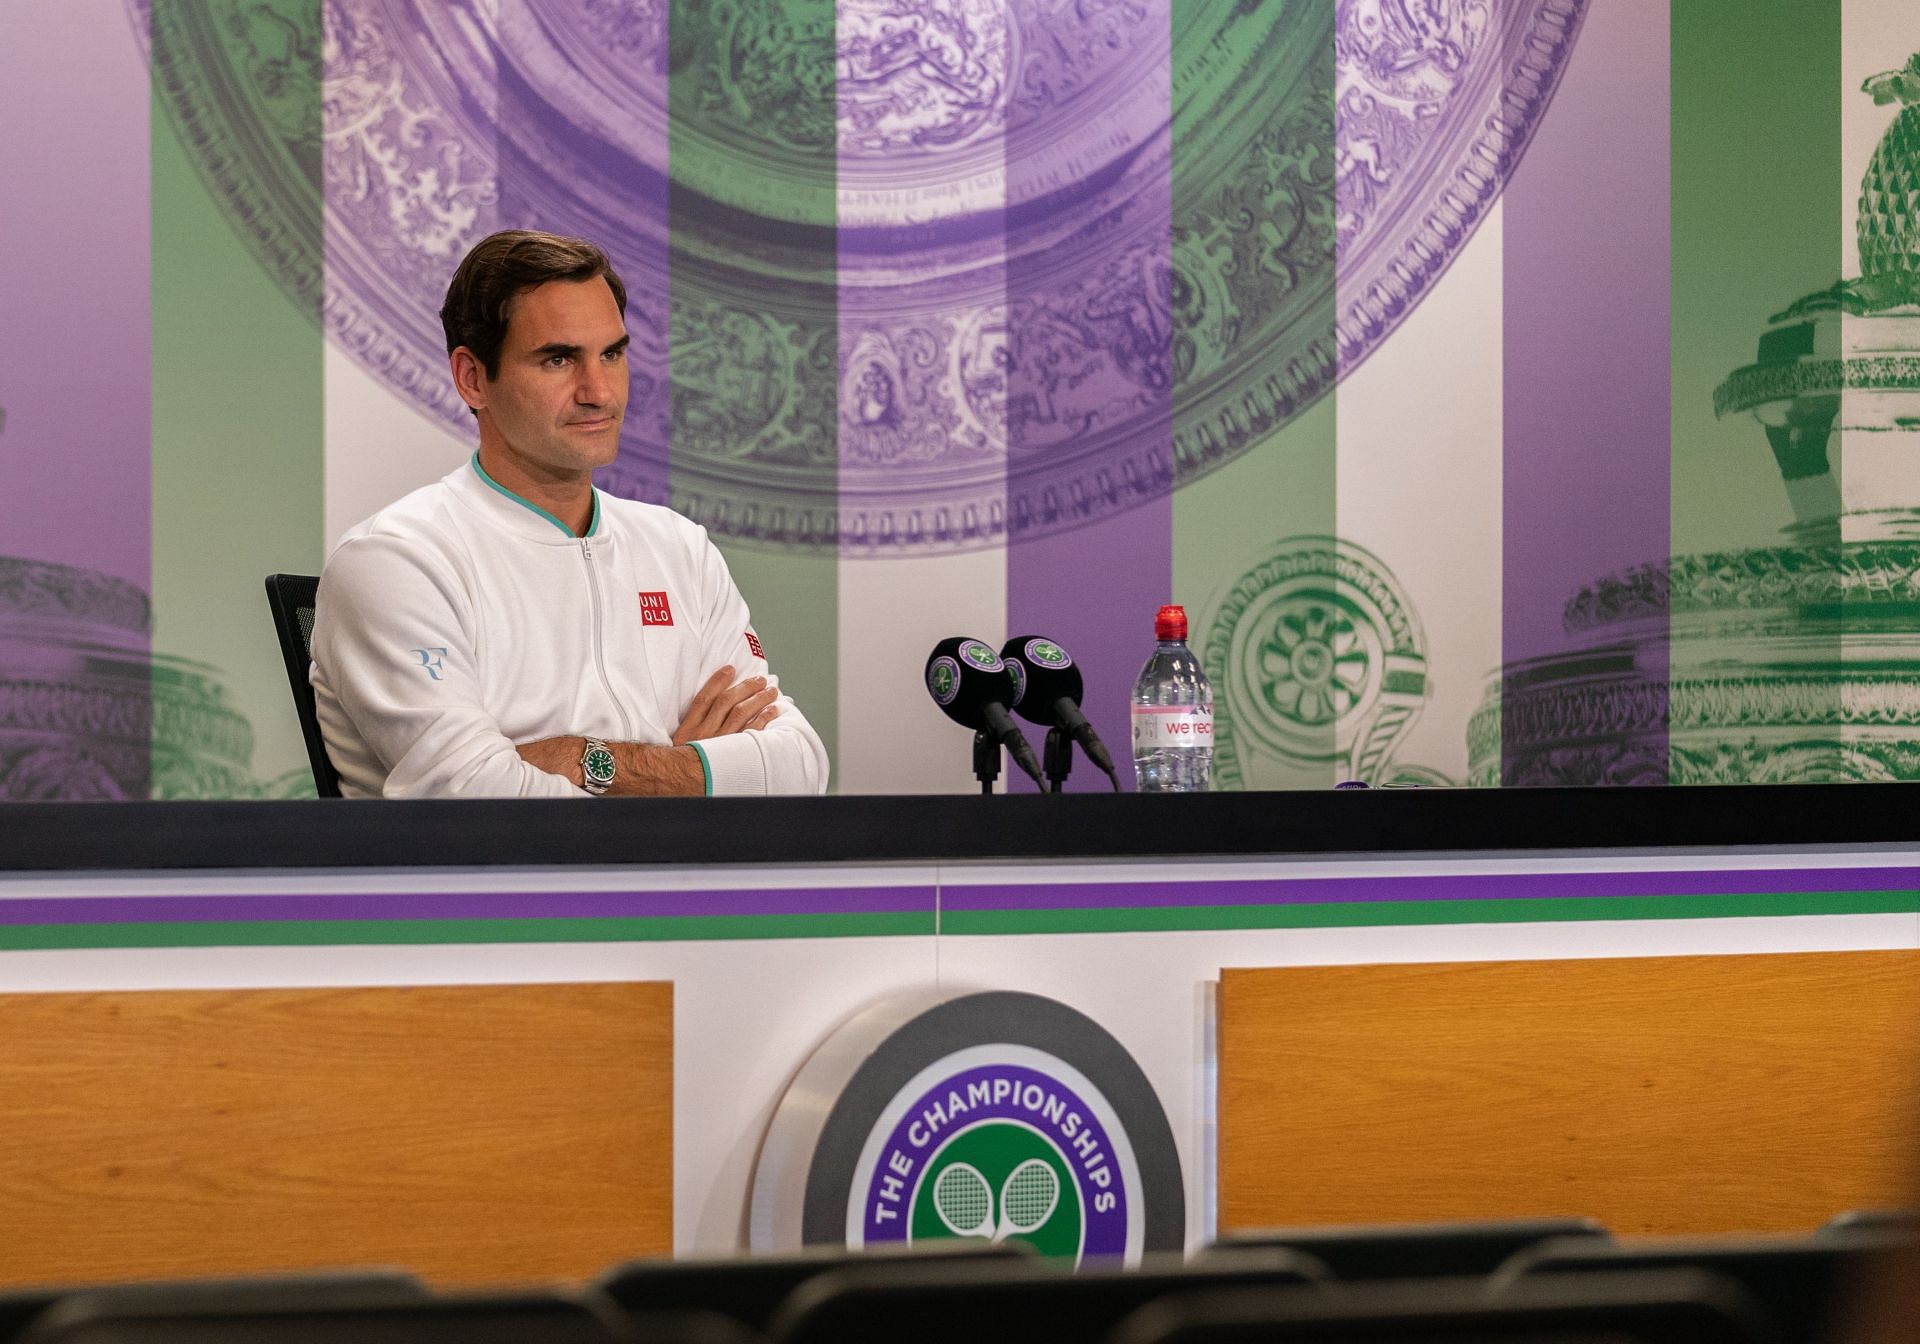 Roger Federer at a press conference during Wimbledon